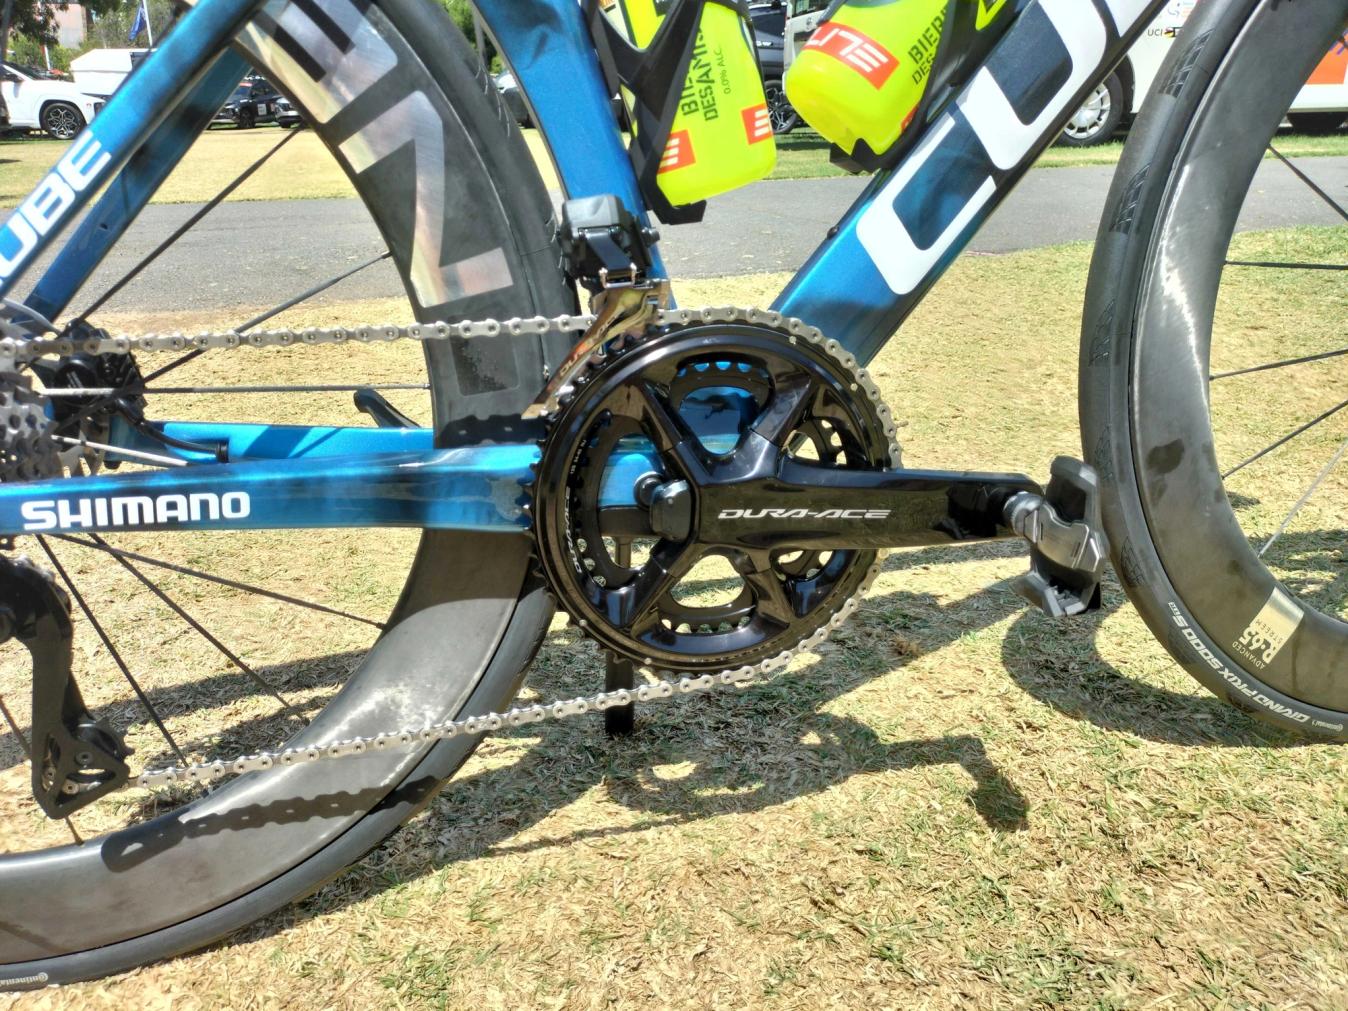 Shimano is the groupset brand of choice for most WorldTour teams